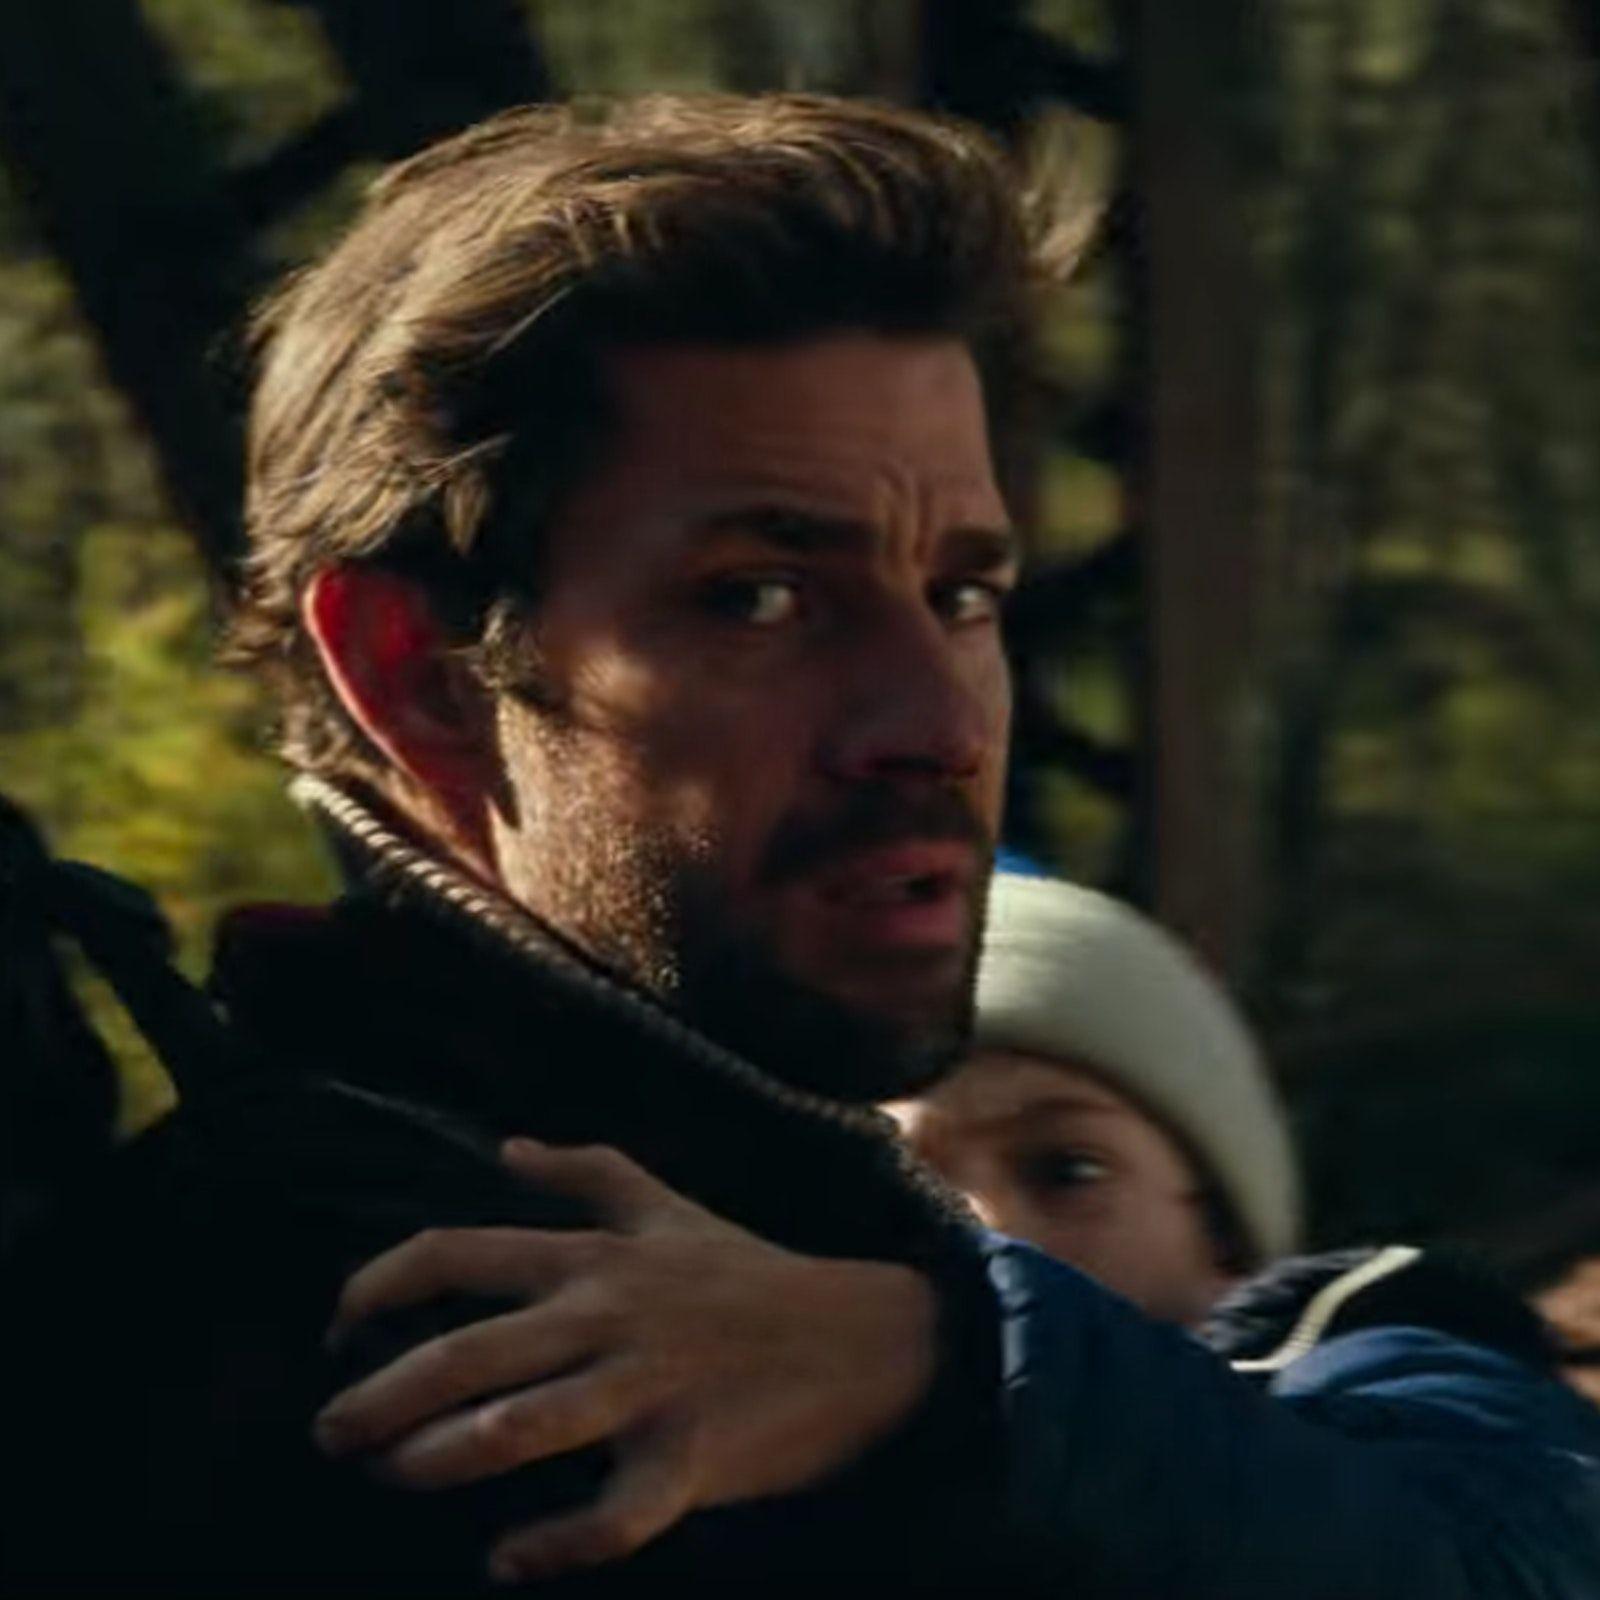 Super Bowl Movie Trailers: 'A Quiet Place' Is Silent Horror